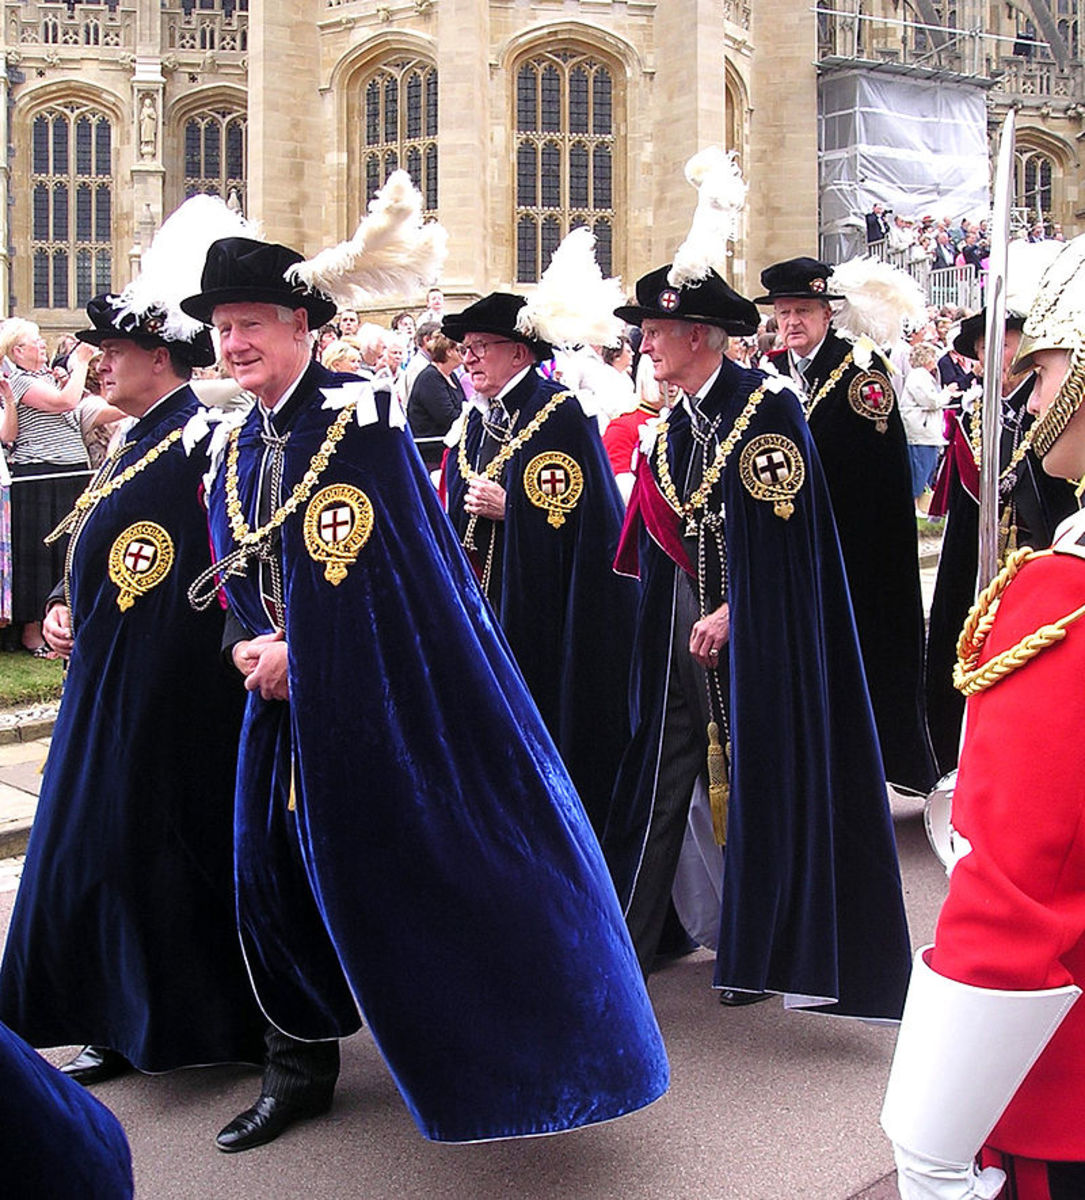 The annual procession of the Knights and Ladies of the Order of the Garter.